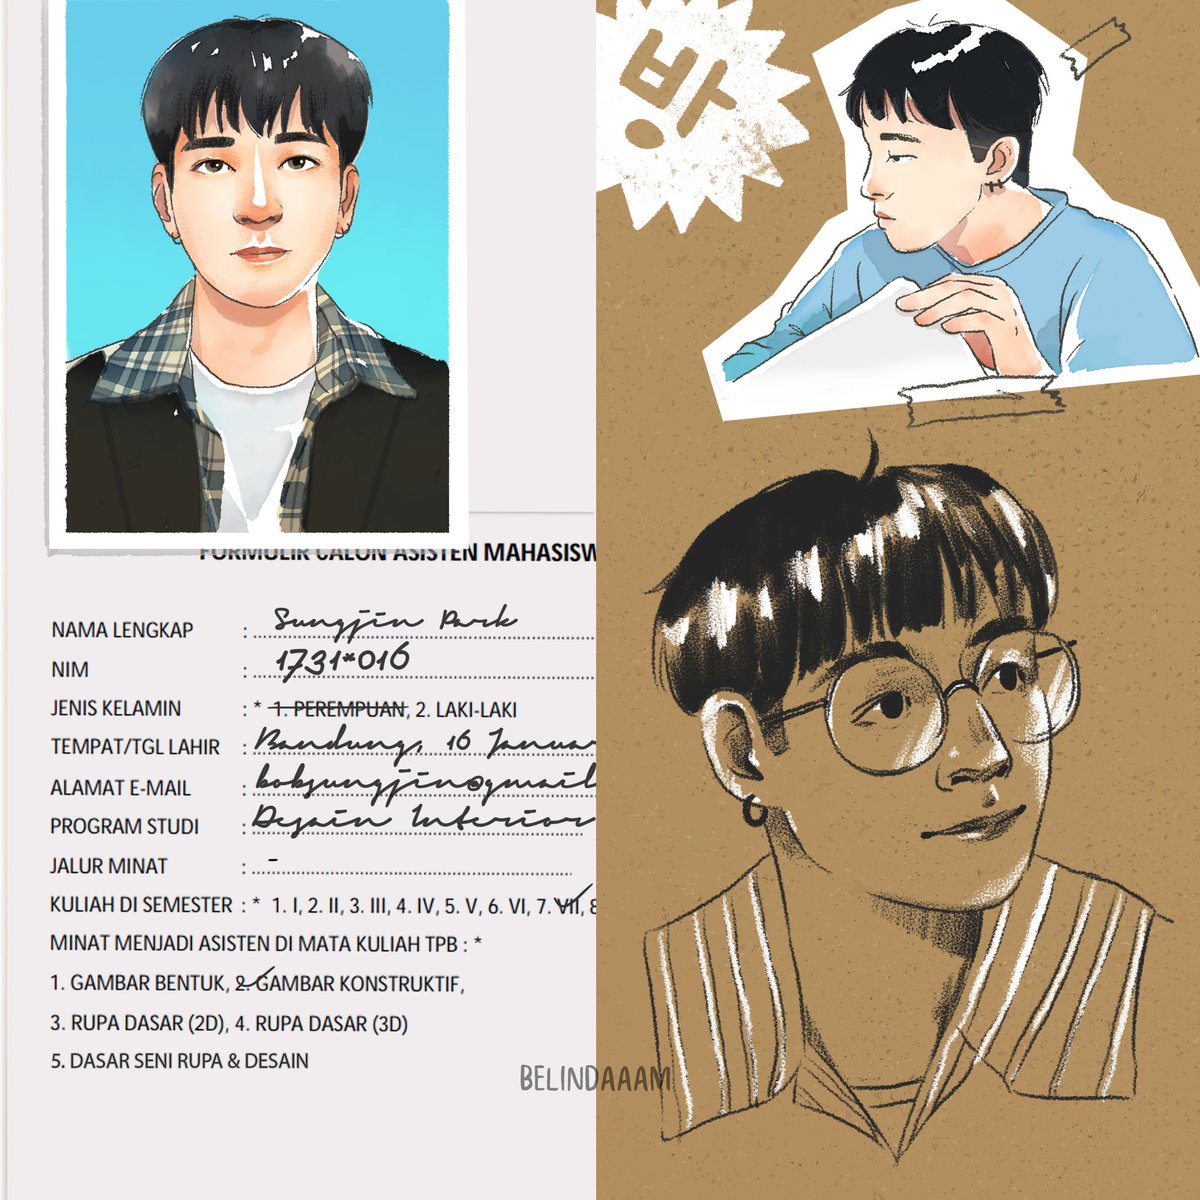 PART 2This is Sungjin as student assistant for Basic Technical Drawing class! @DAY6_BOBSUNGJIN #day6  #데이식스  #fanart